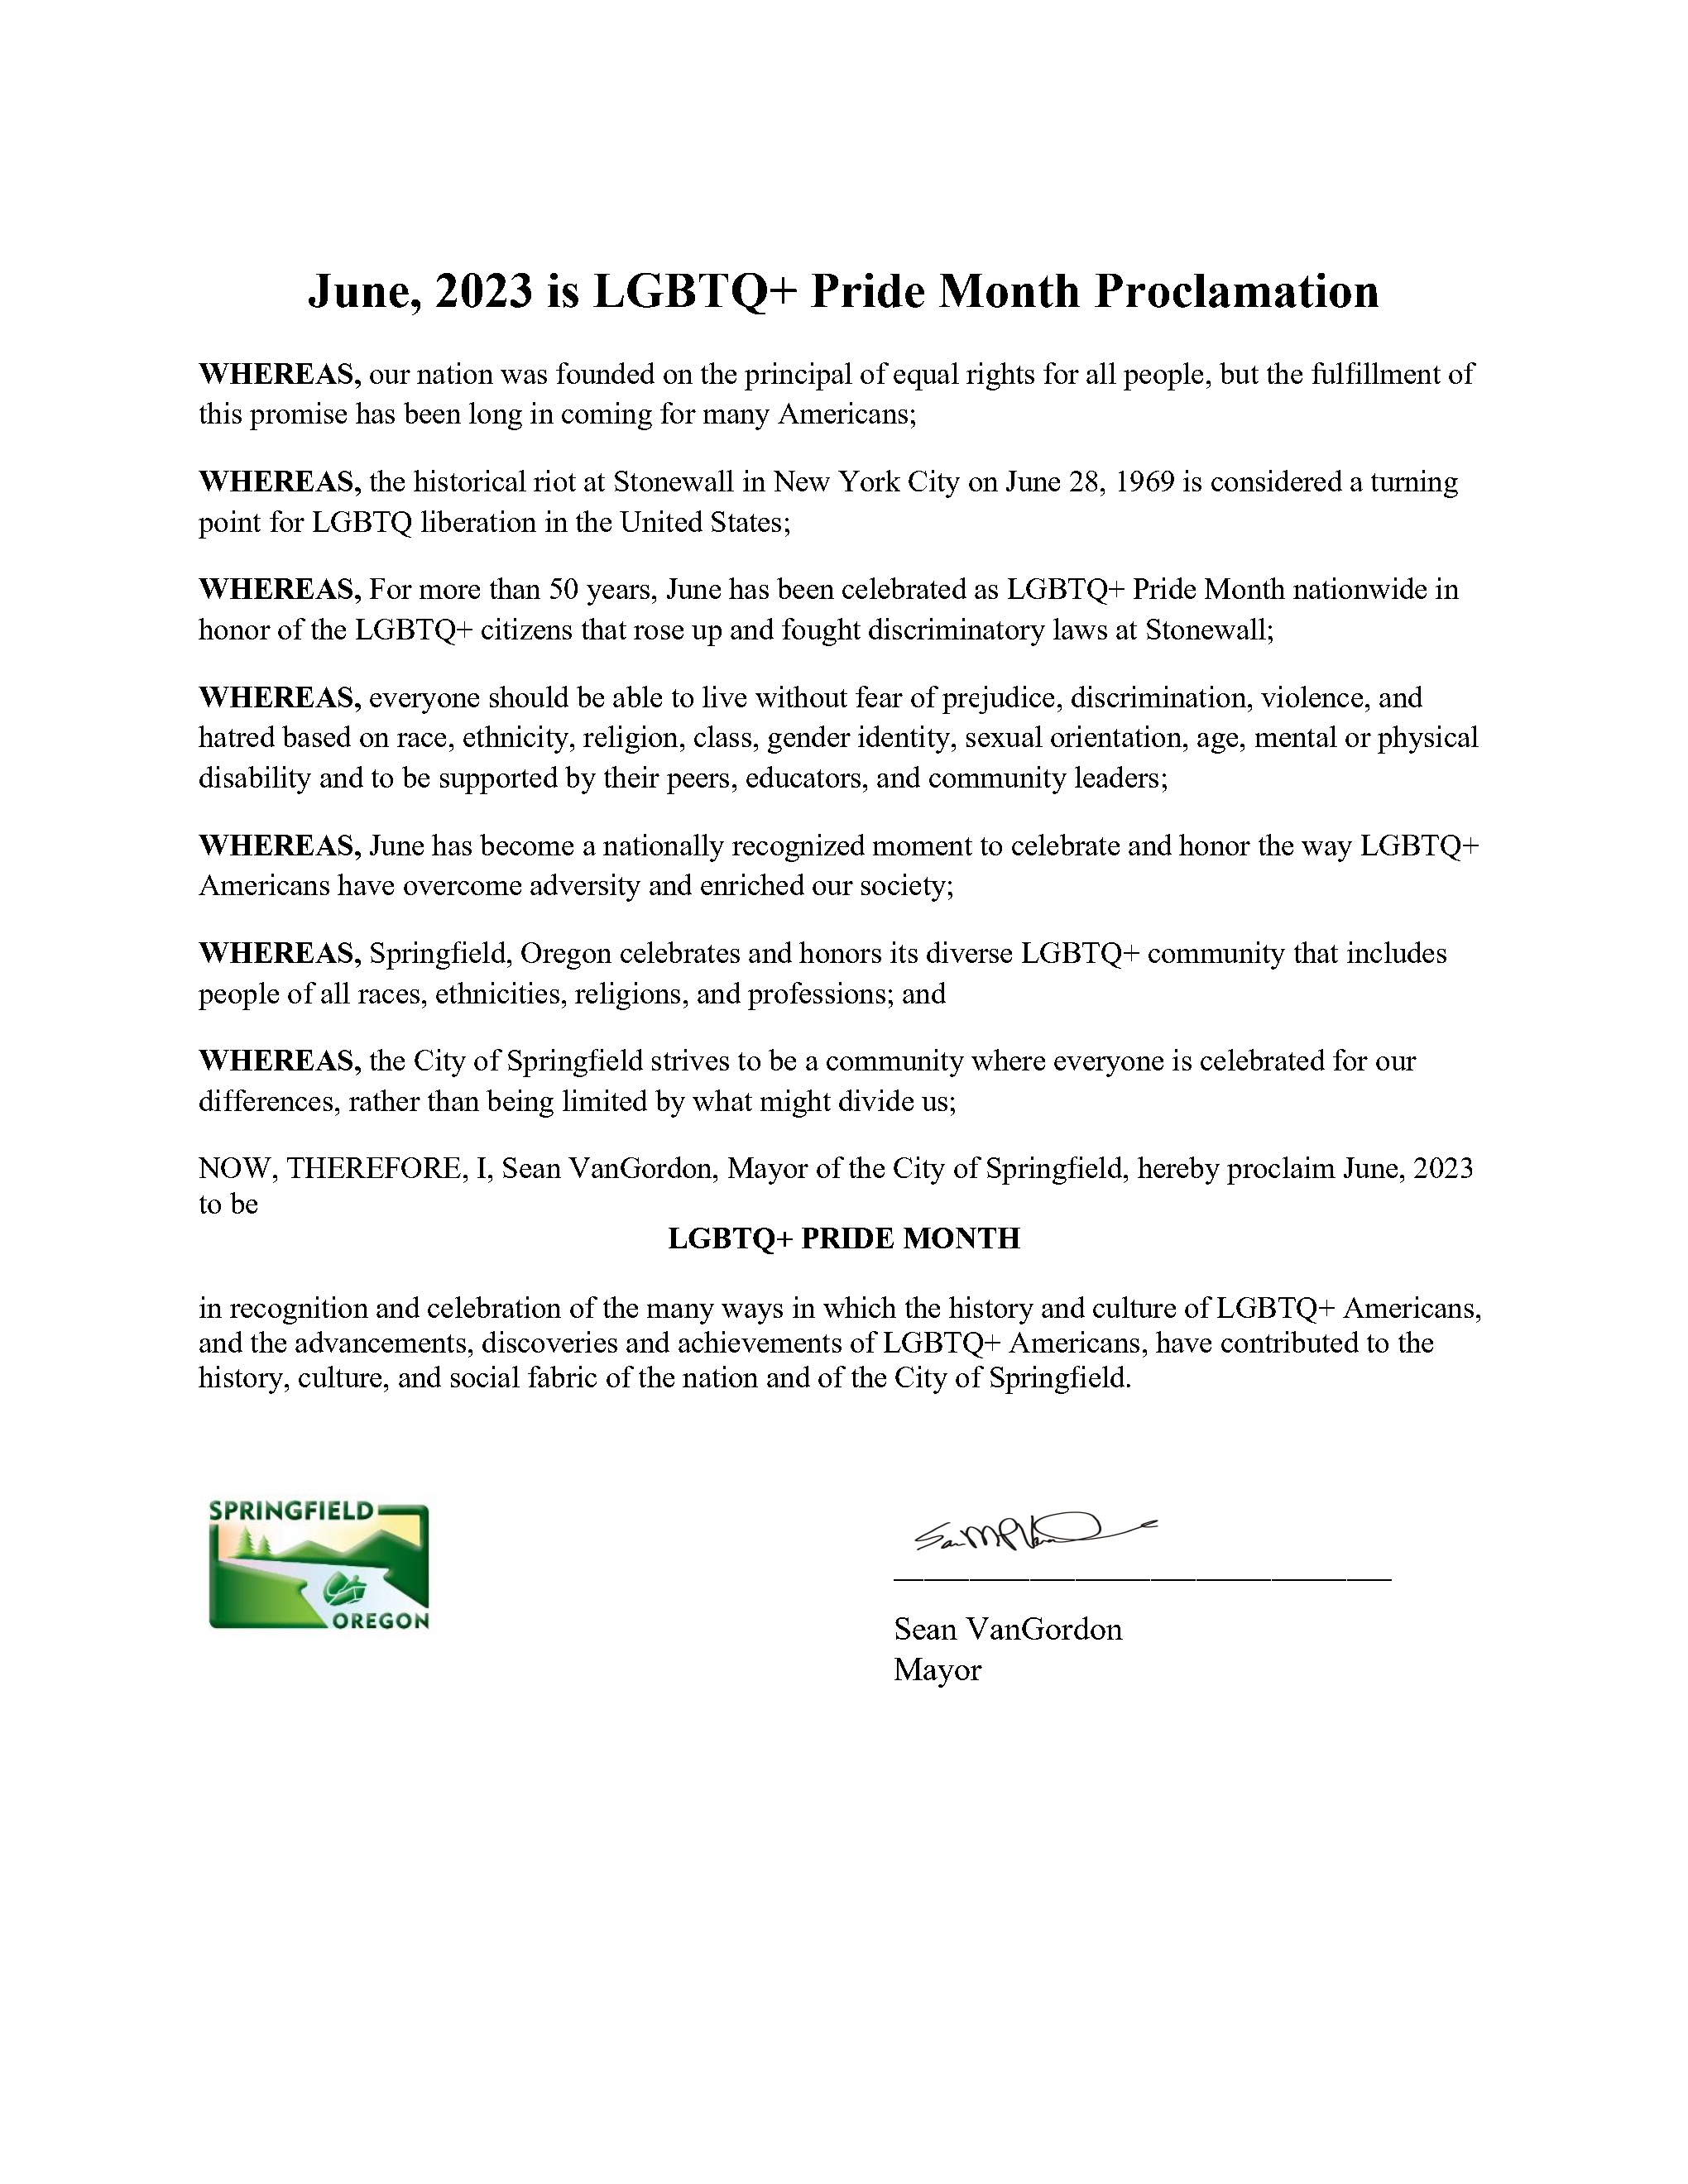 Image of the proclamation for 2023 LGBTQ+ Pride Month